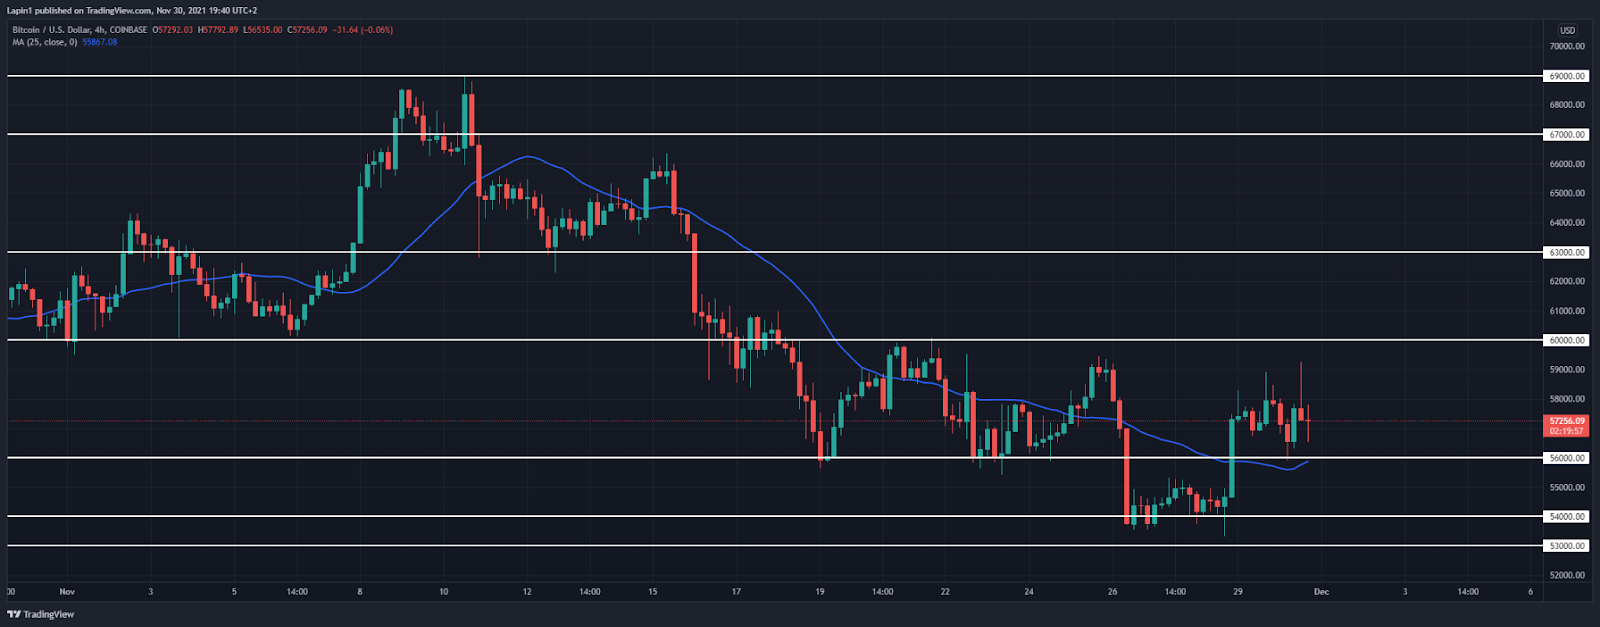 Bitcoin Price Analysis: BTC rejects upside at $59,000, more downside to follow?